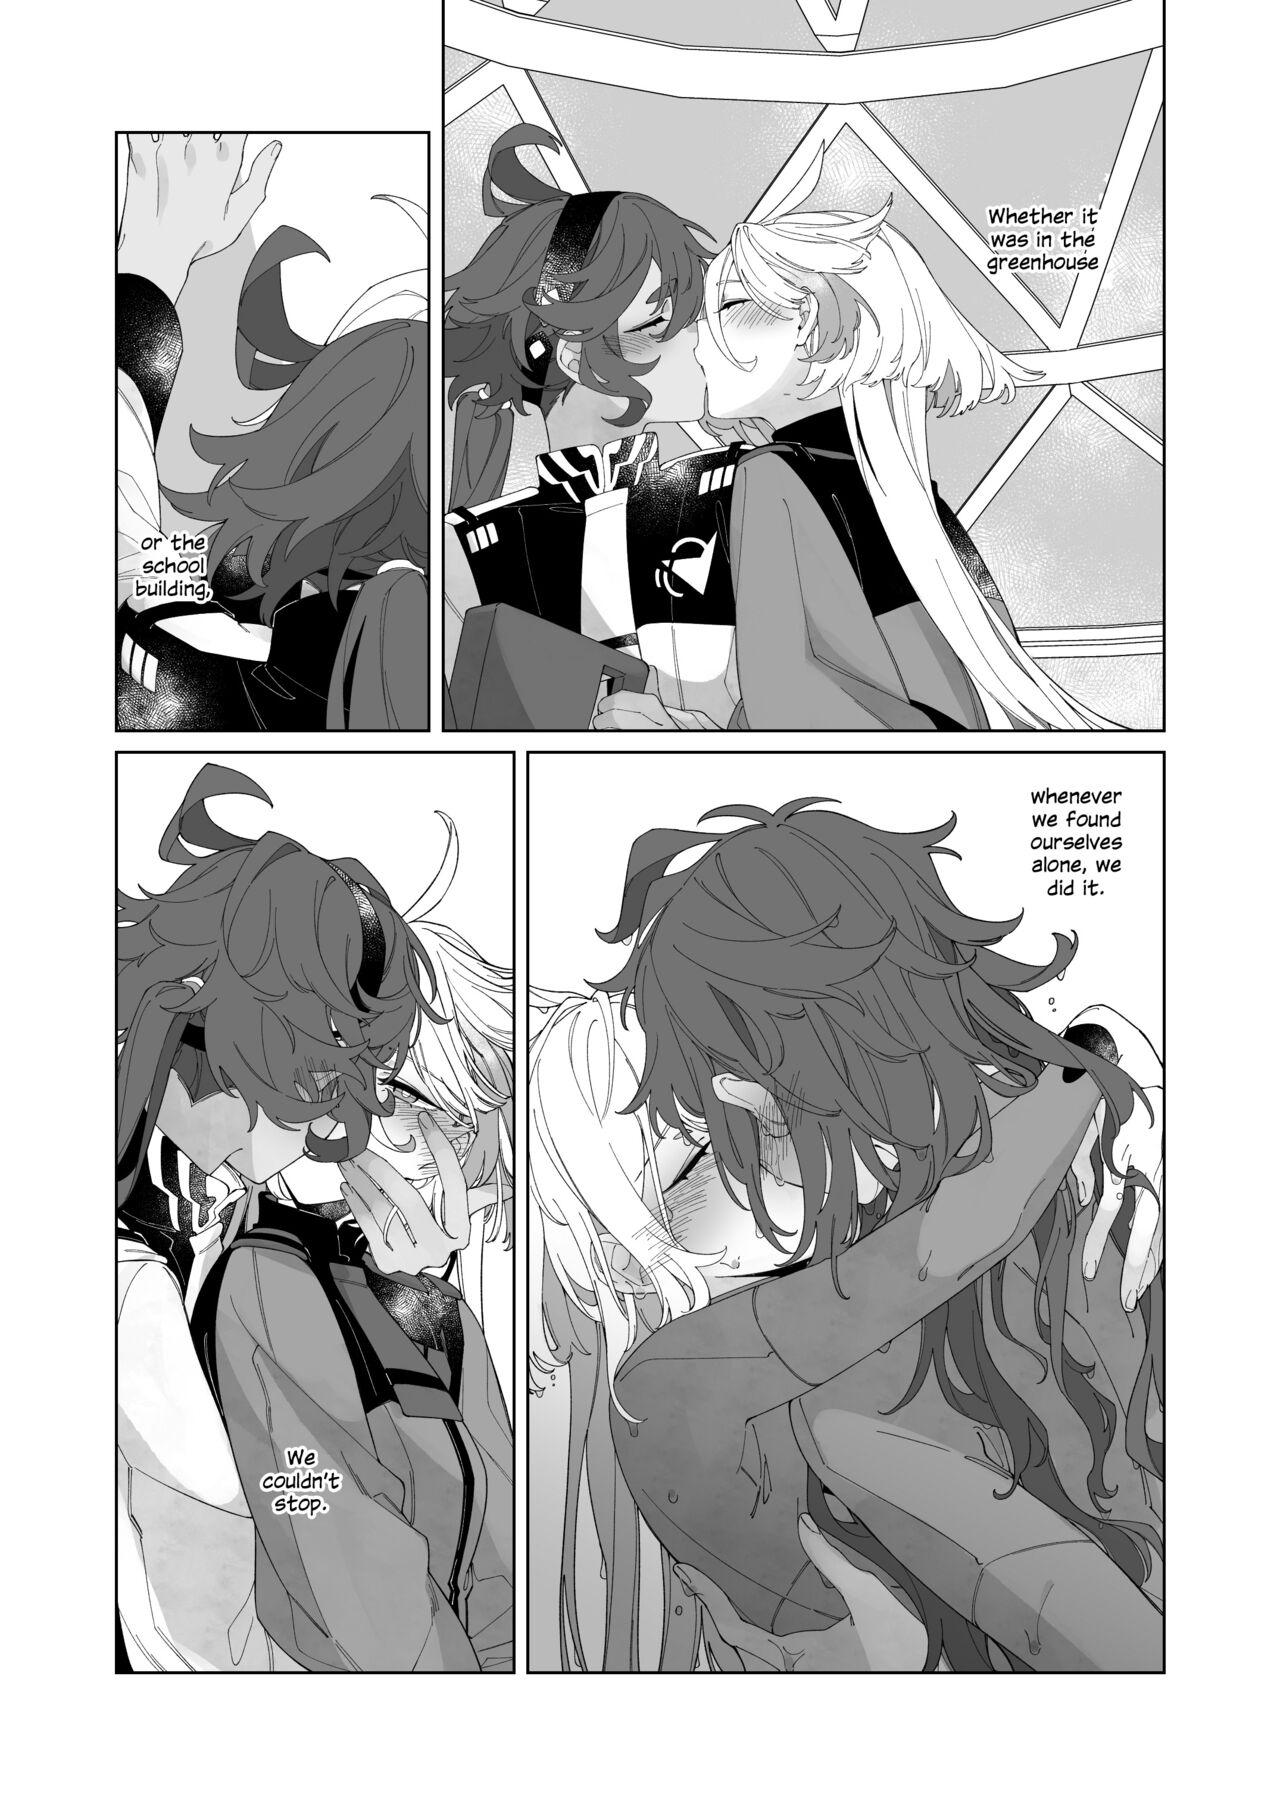 Hardcore Gay Kiss no Ato Nani ga Shitai? | After Kissing, What Else Do You Want to Do? - Mobile suit gundam the witch from mercury HD - Page 8